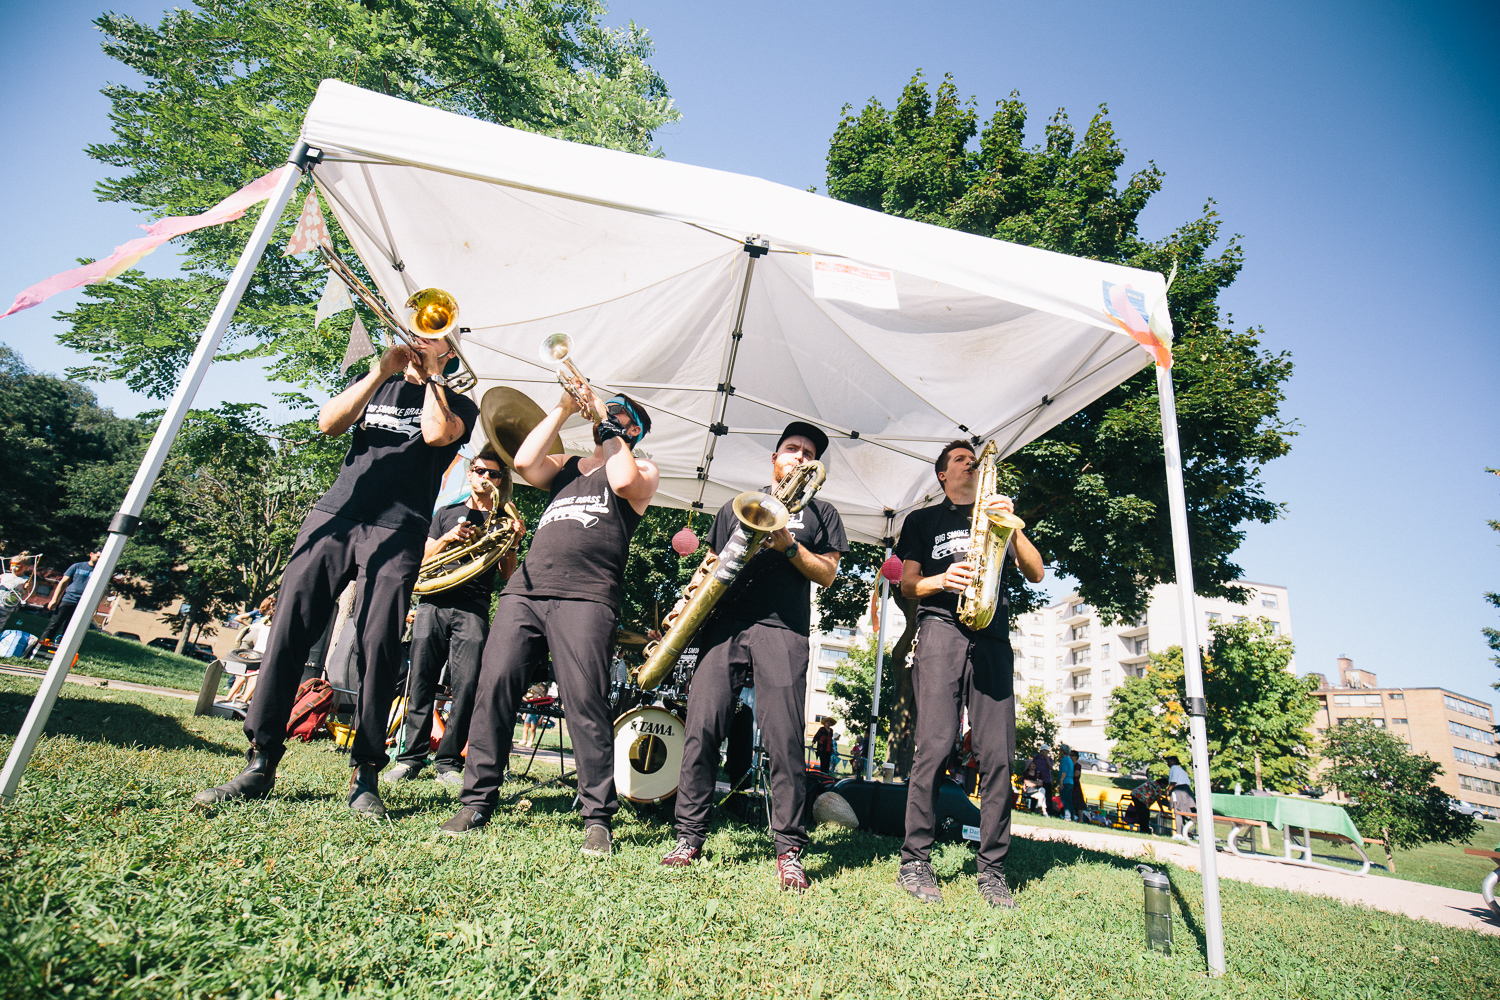 A brass band plays instruments under a white tent.